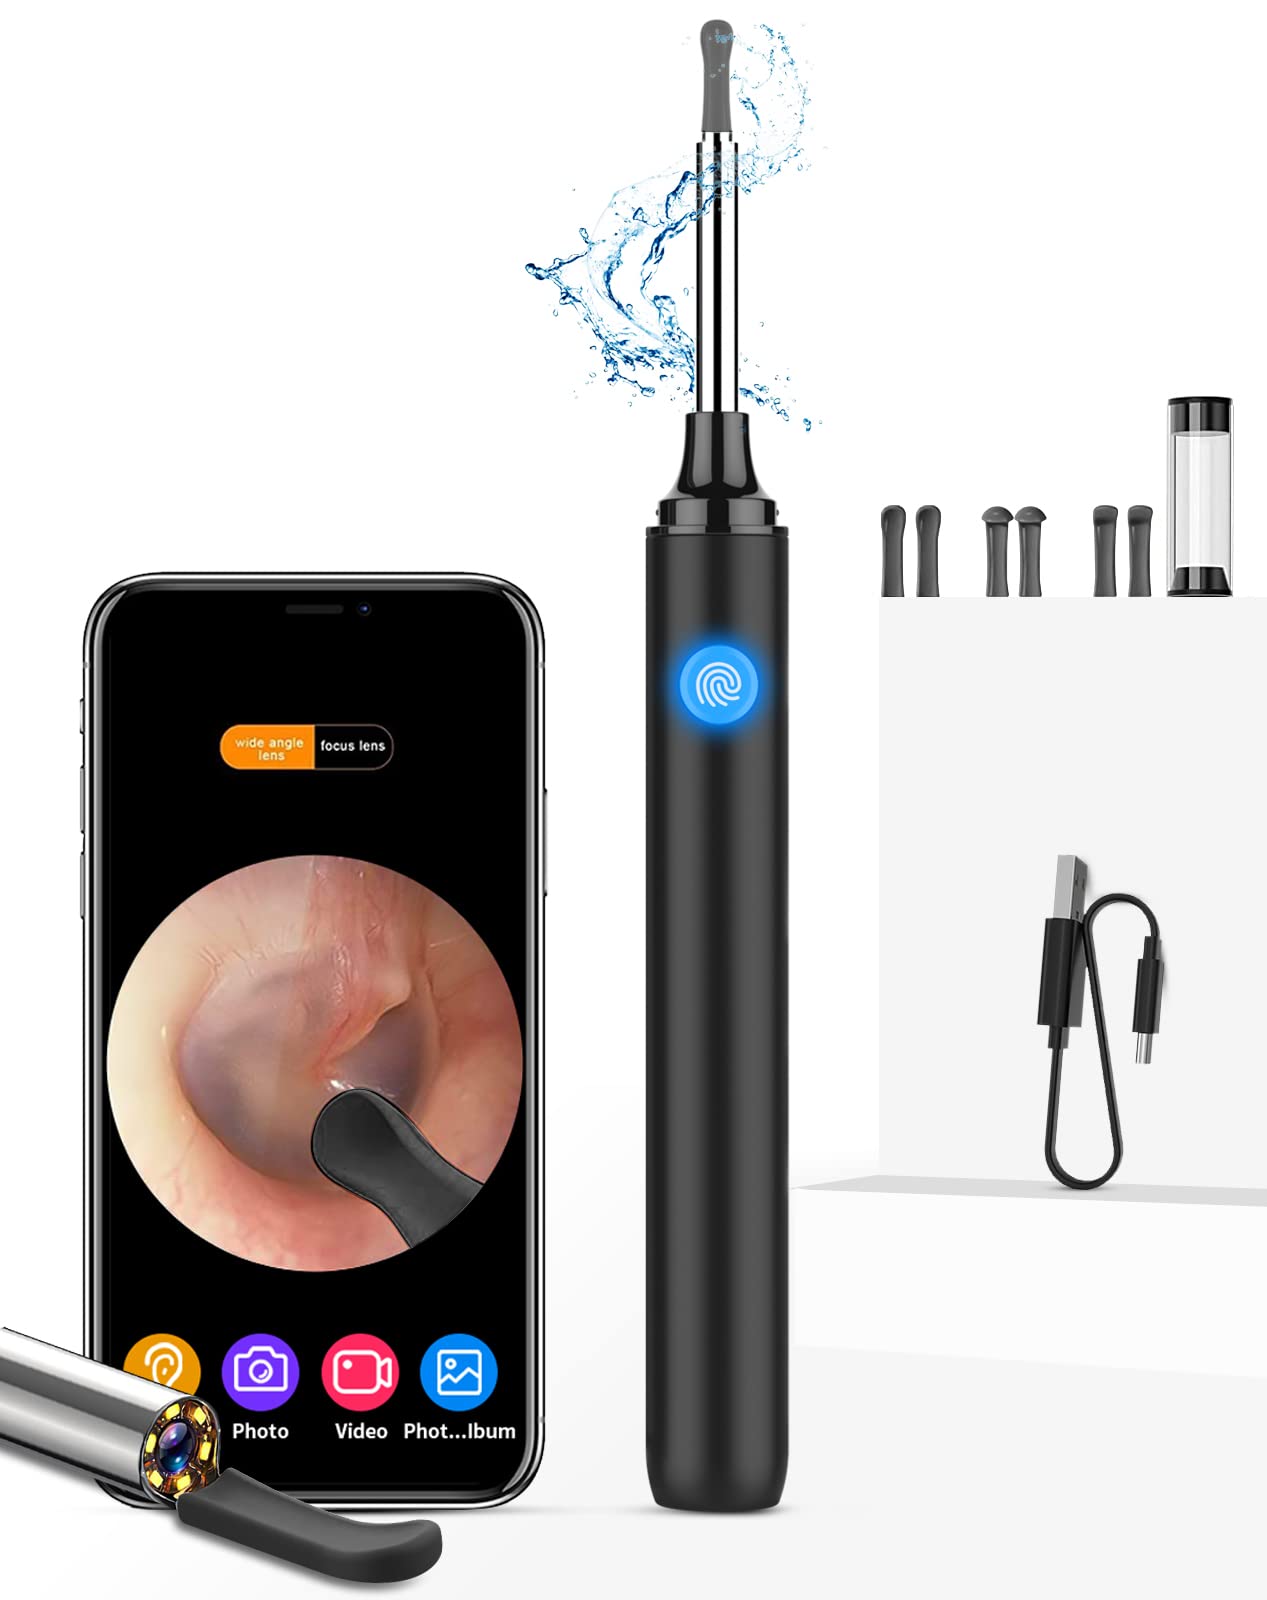 Ear Wax Removal, Ear Wax Removal Tool with 1296P HD Camera and